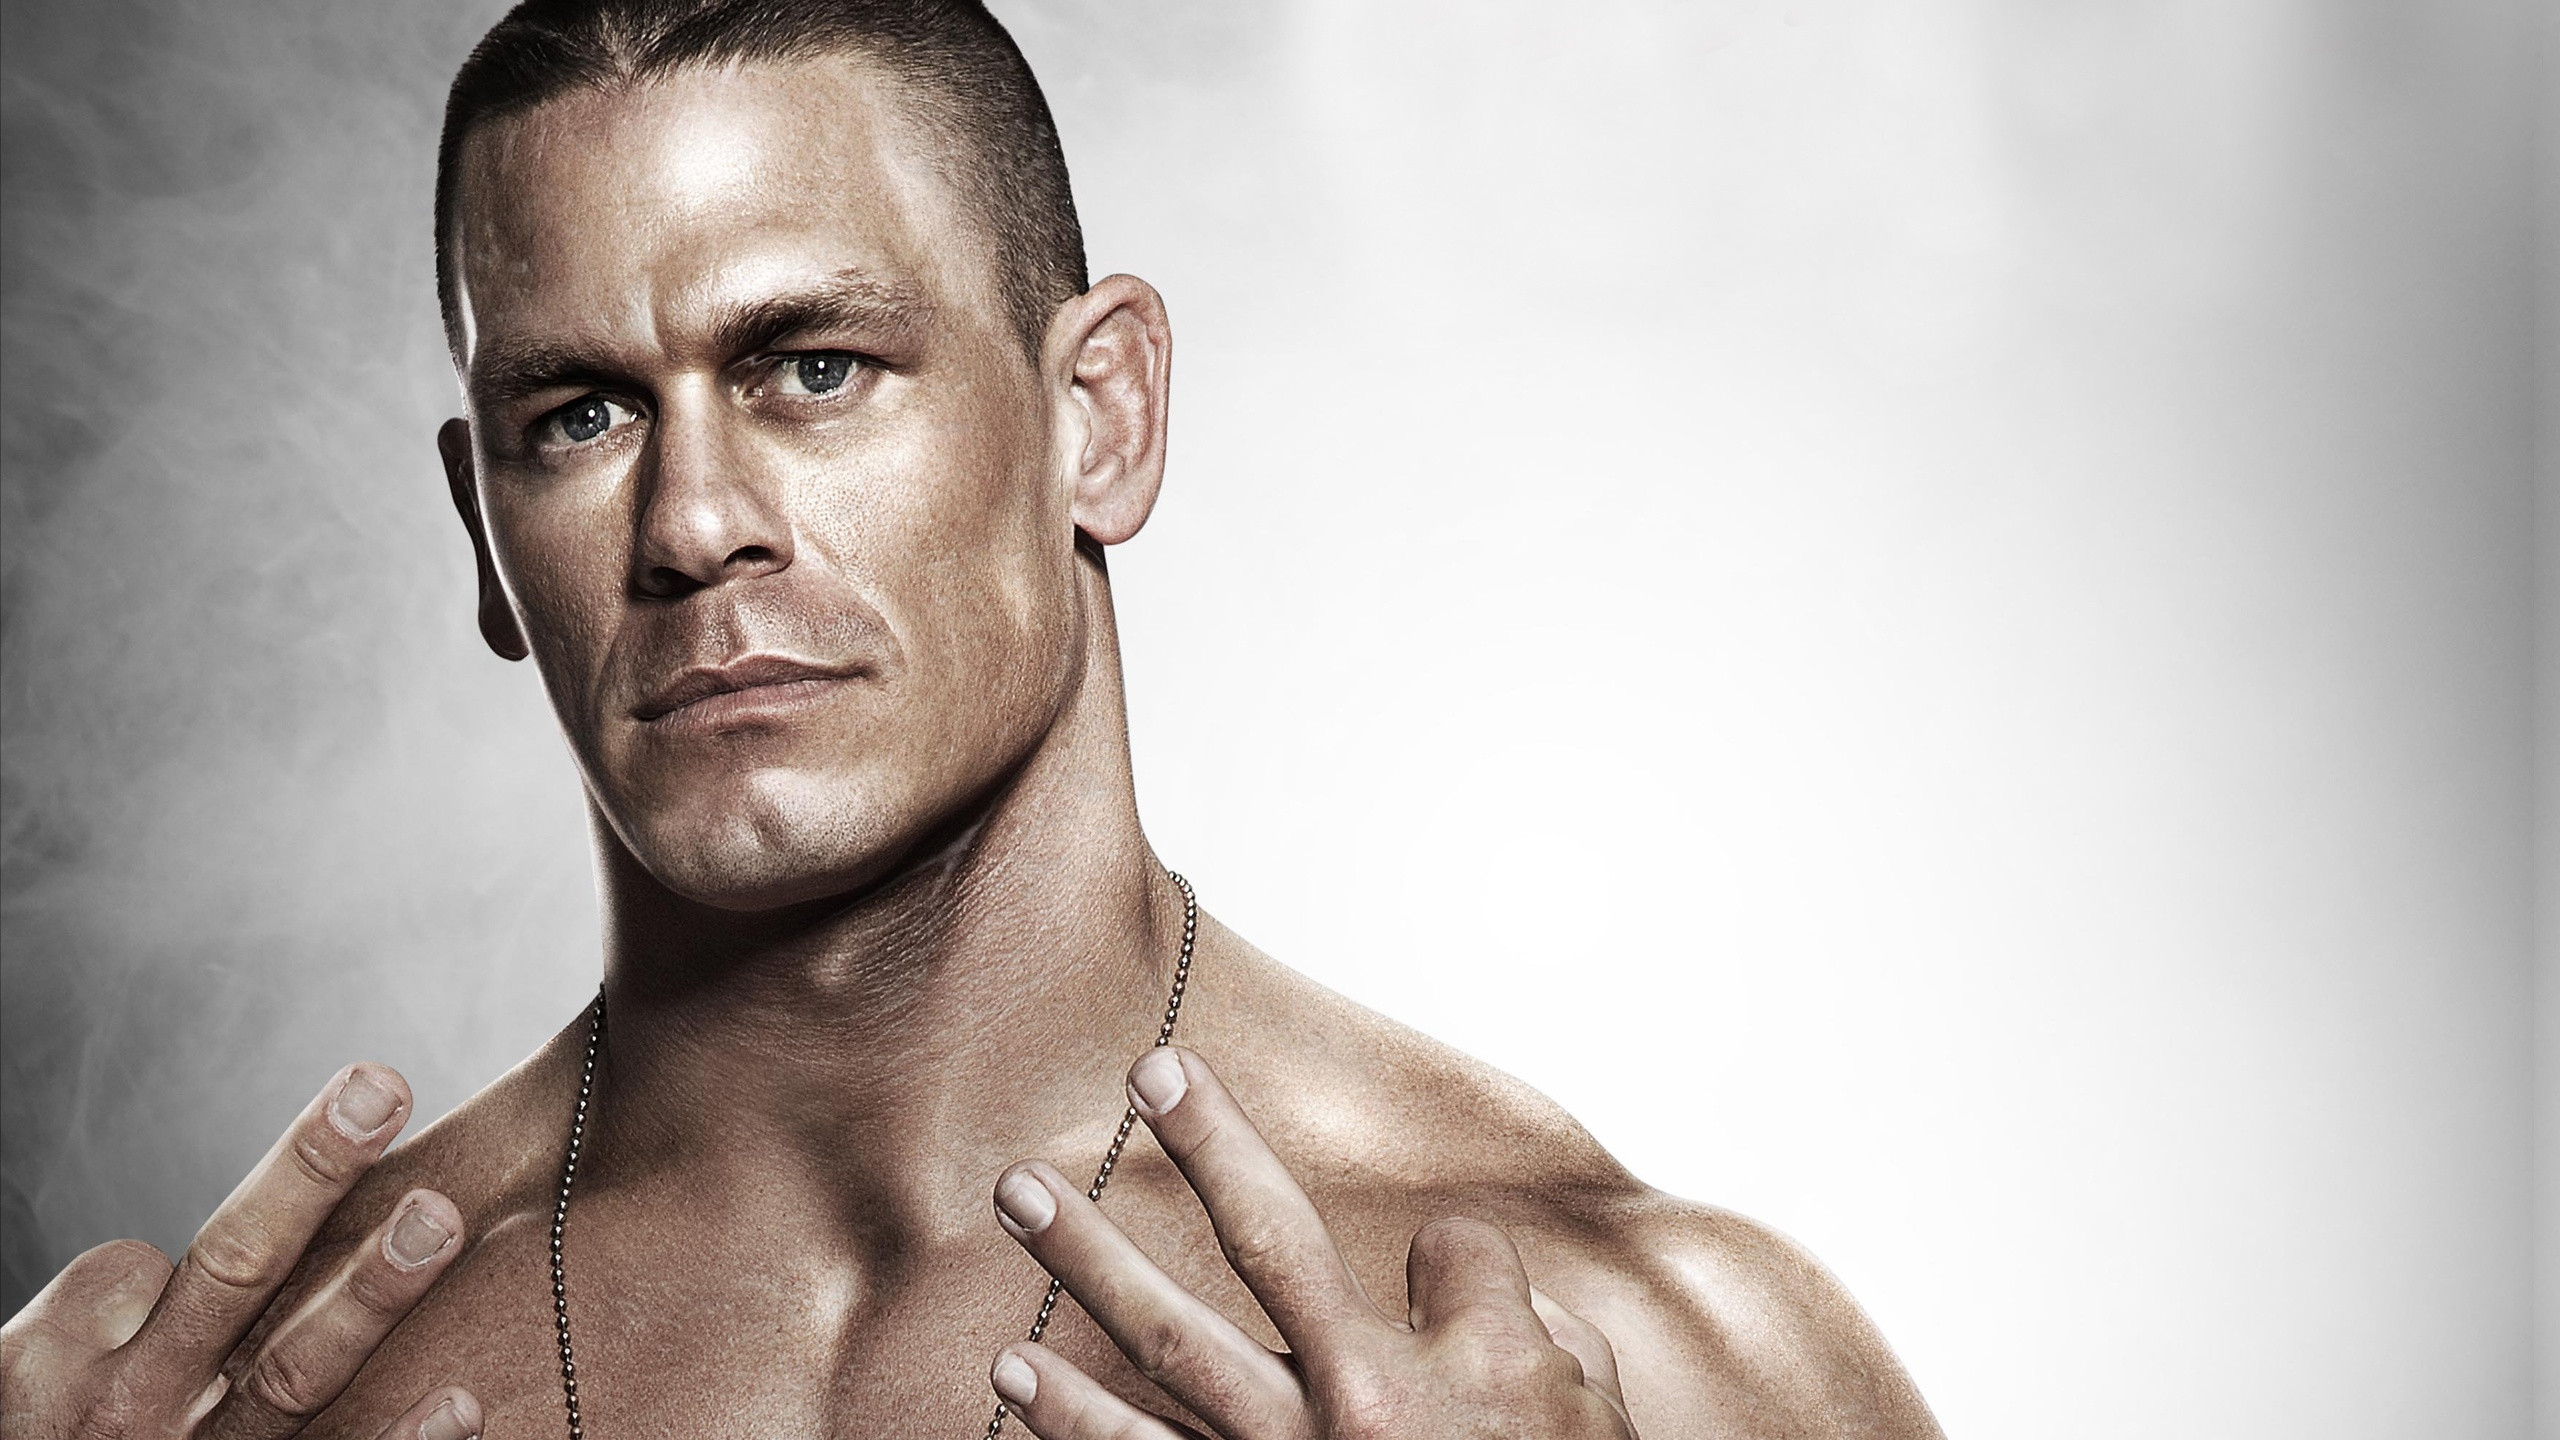 Free download WWE John Cena Wallpapers 2015 HD [2560x1440] for your